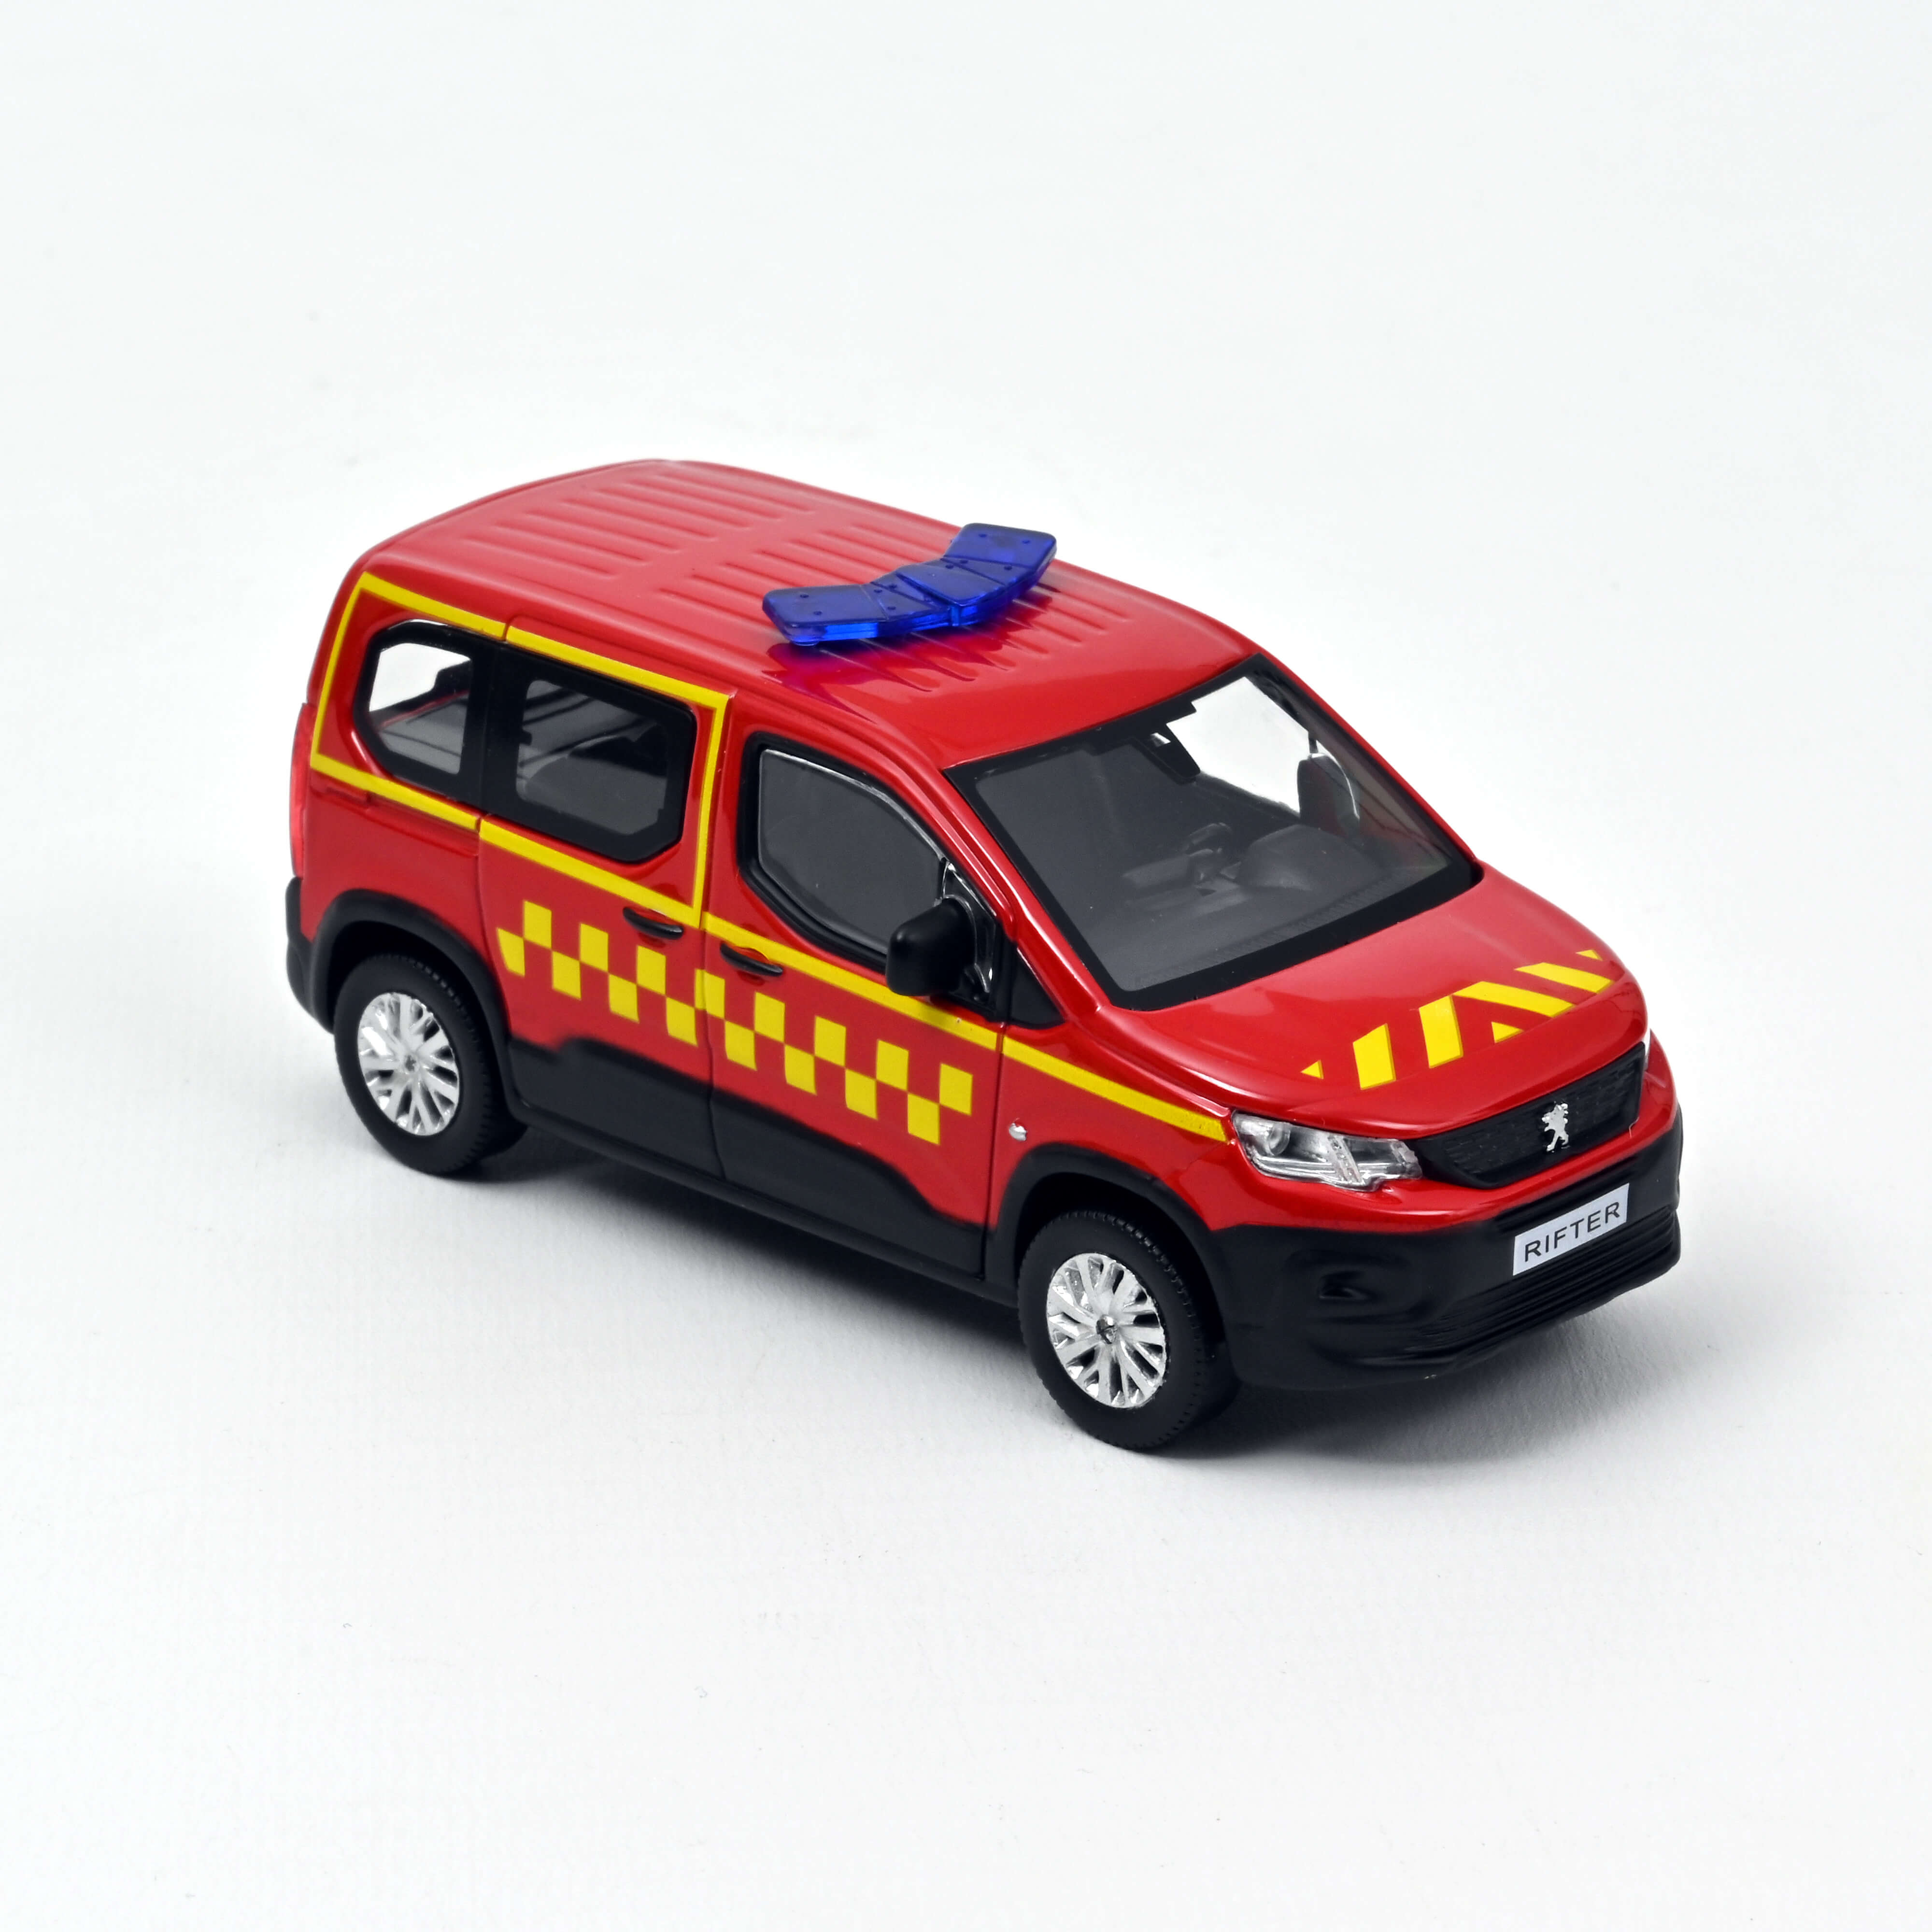 Peugeot Rifter´19 Pompiers 1:43 with side square yellow deco